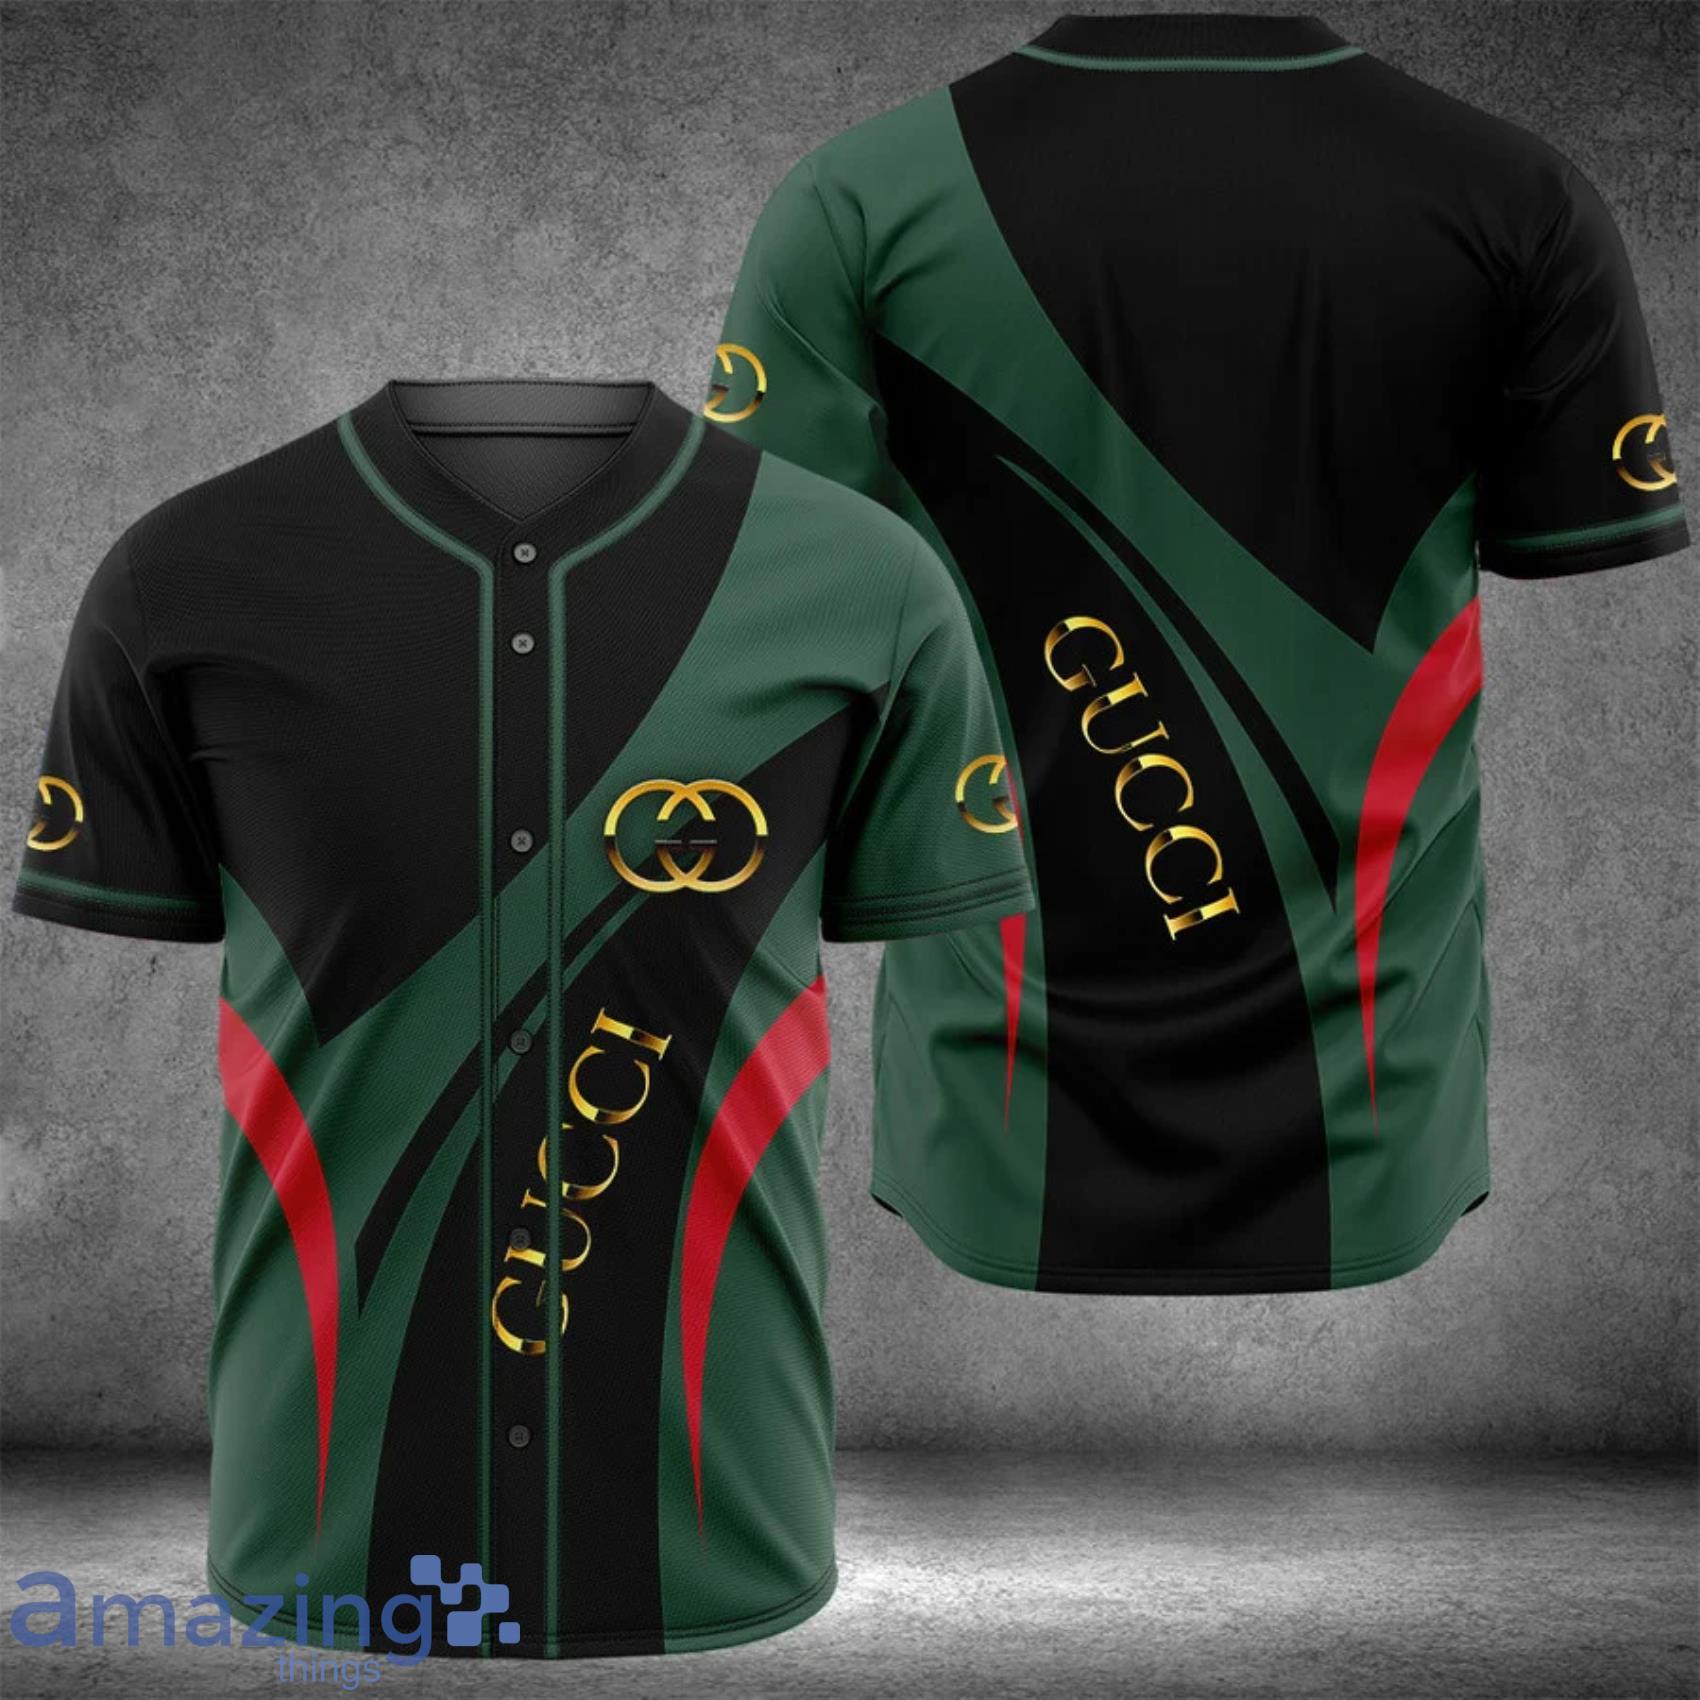 Gucci Style 10 Baseball Jersey Clothes Sport For Men Women